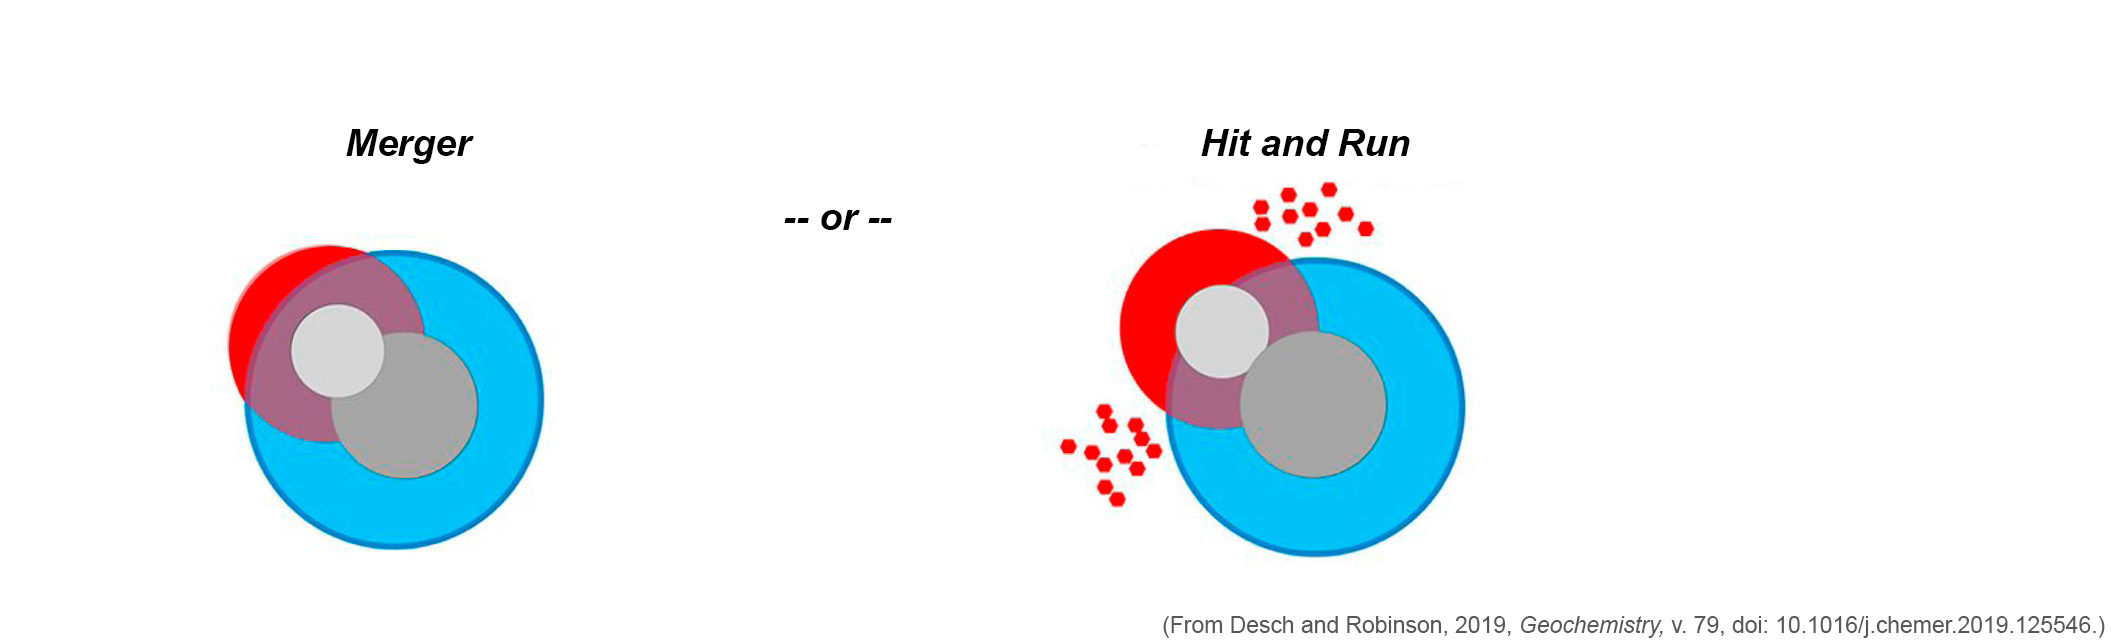 Stage 3: Giant Impact, based on Desch and Robinson, 2019.